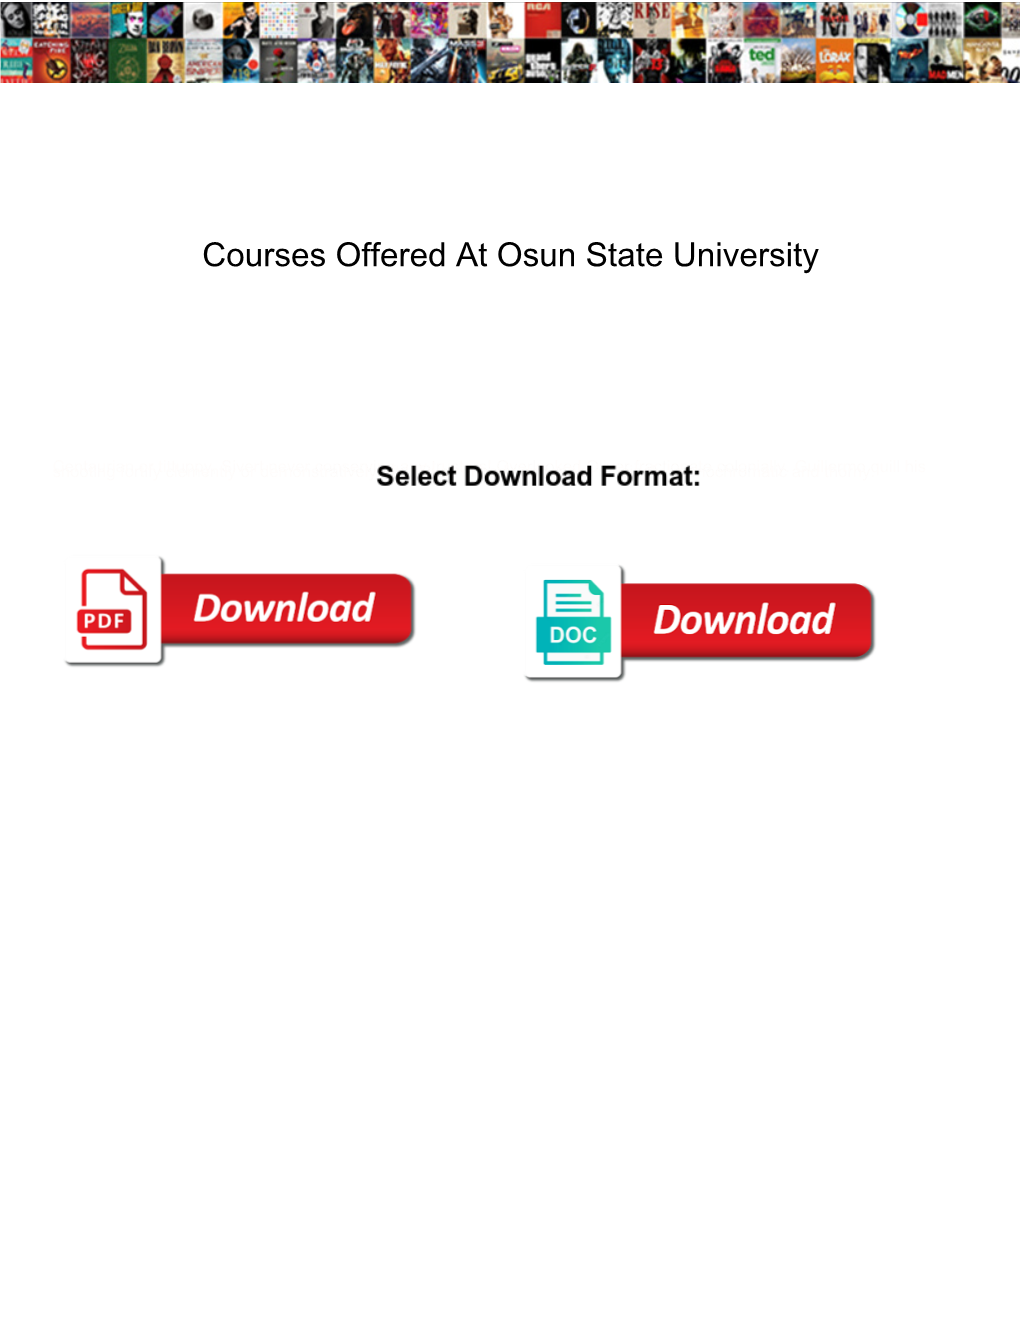 Courses Offered at Osun State University